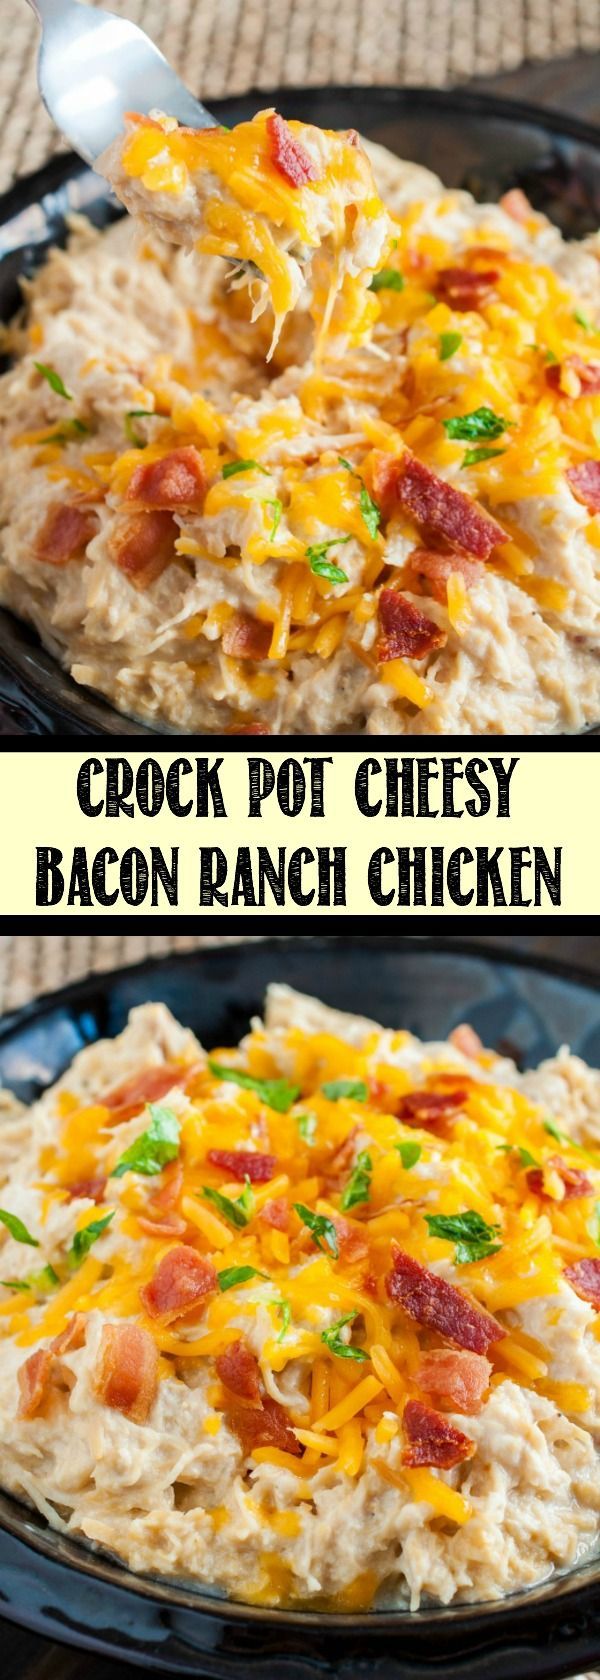 Crock Pot Cheesy Bacon Ranch Chicken is one of the easiest and most delicious chicken recipes ever! Wondering what to make for